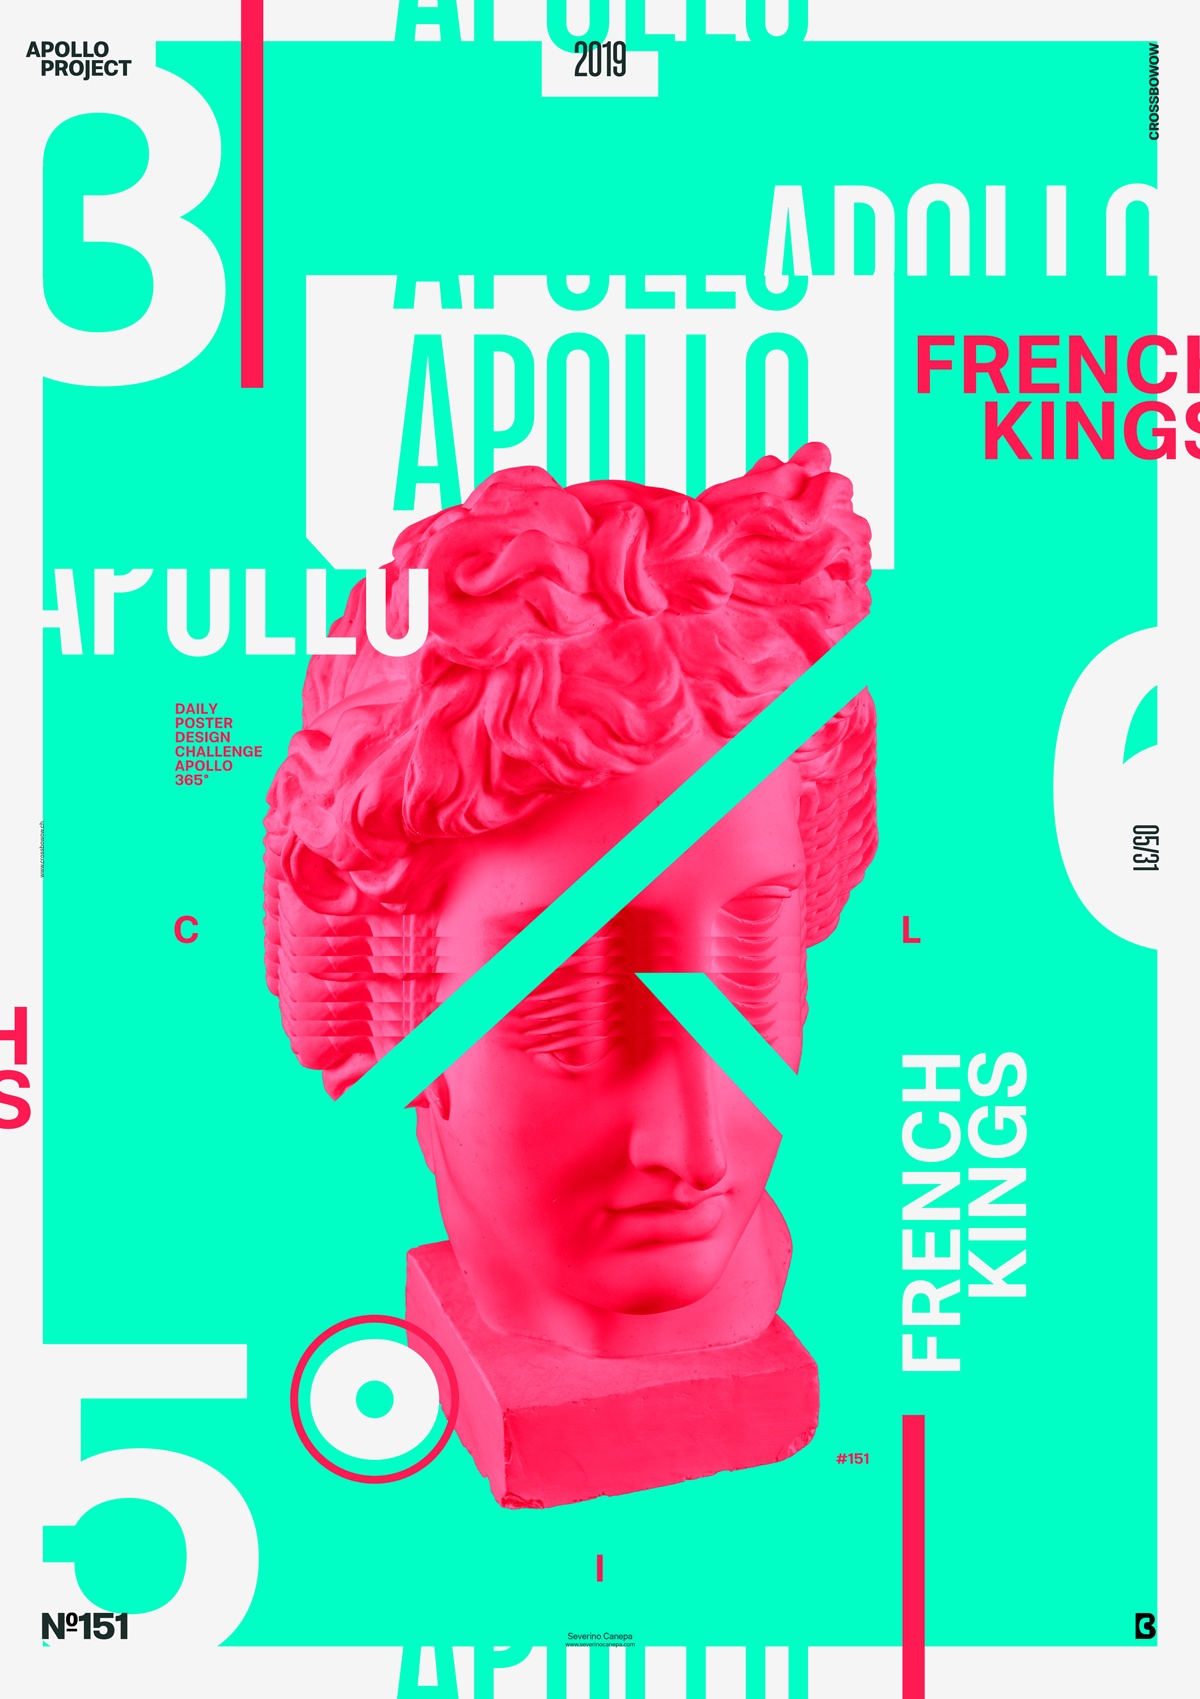 Fun and playful design number 151 French Kings made with bright colors